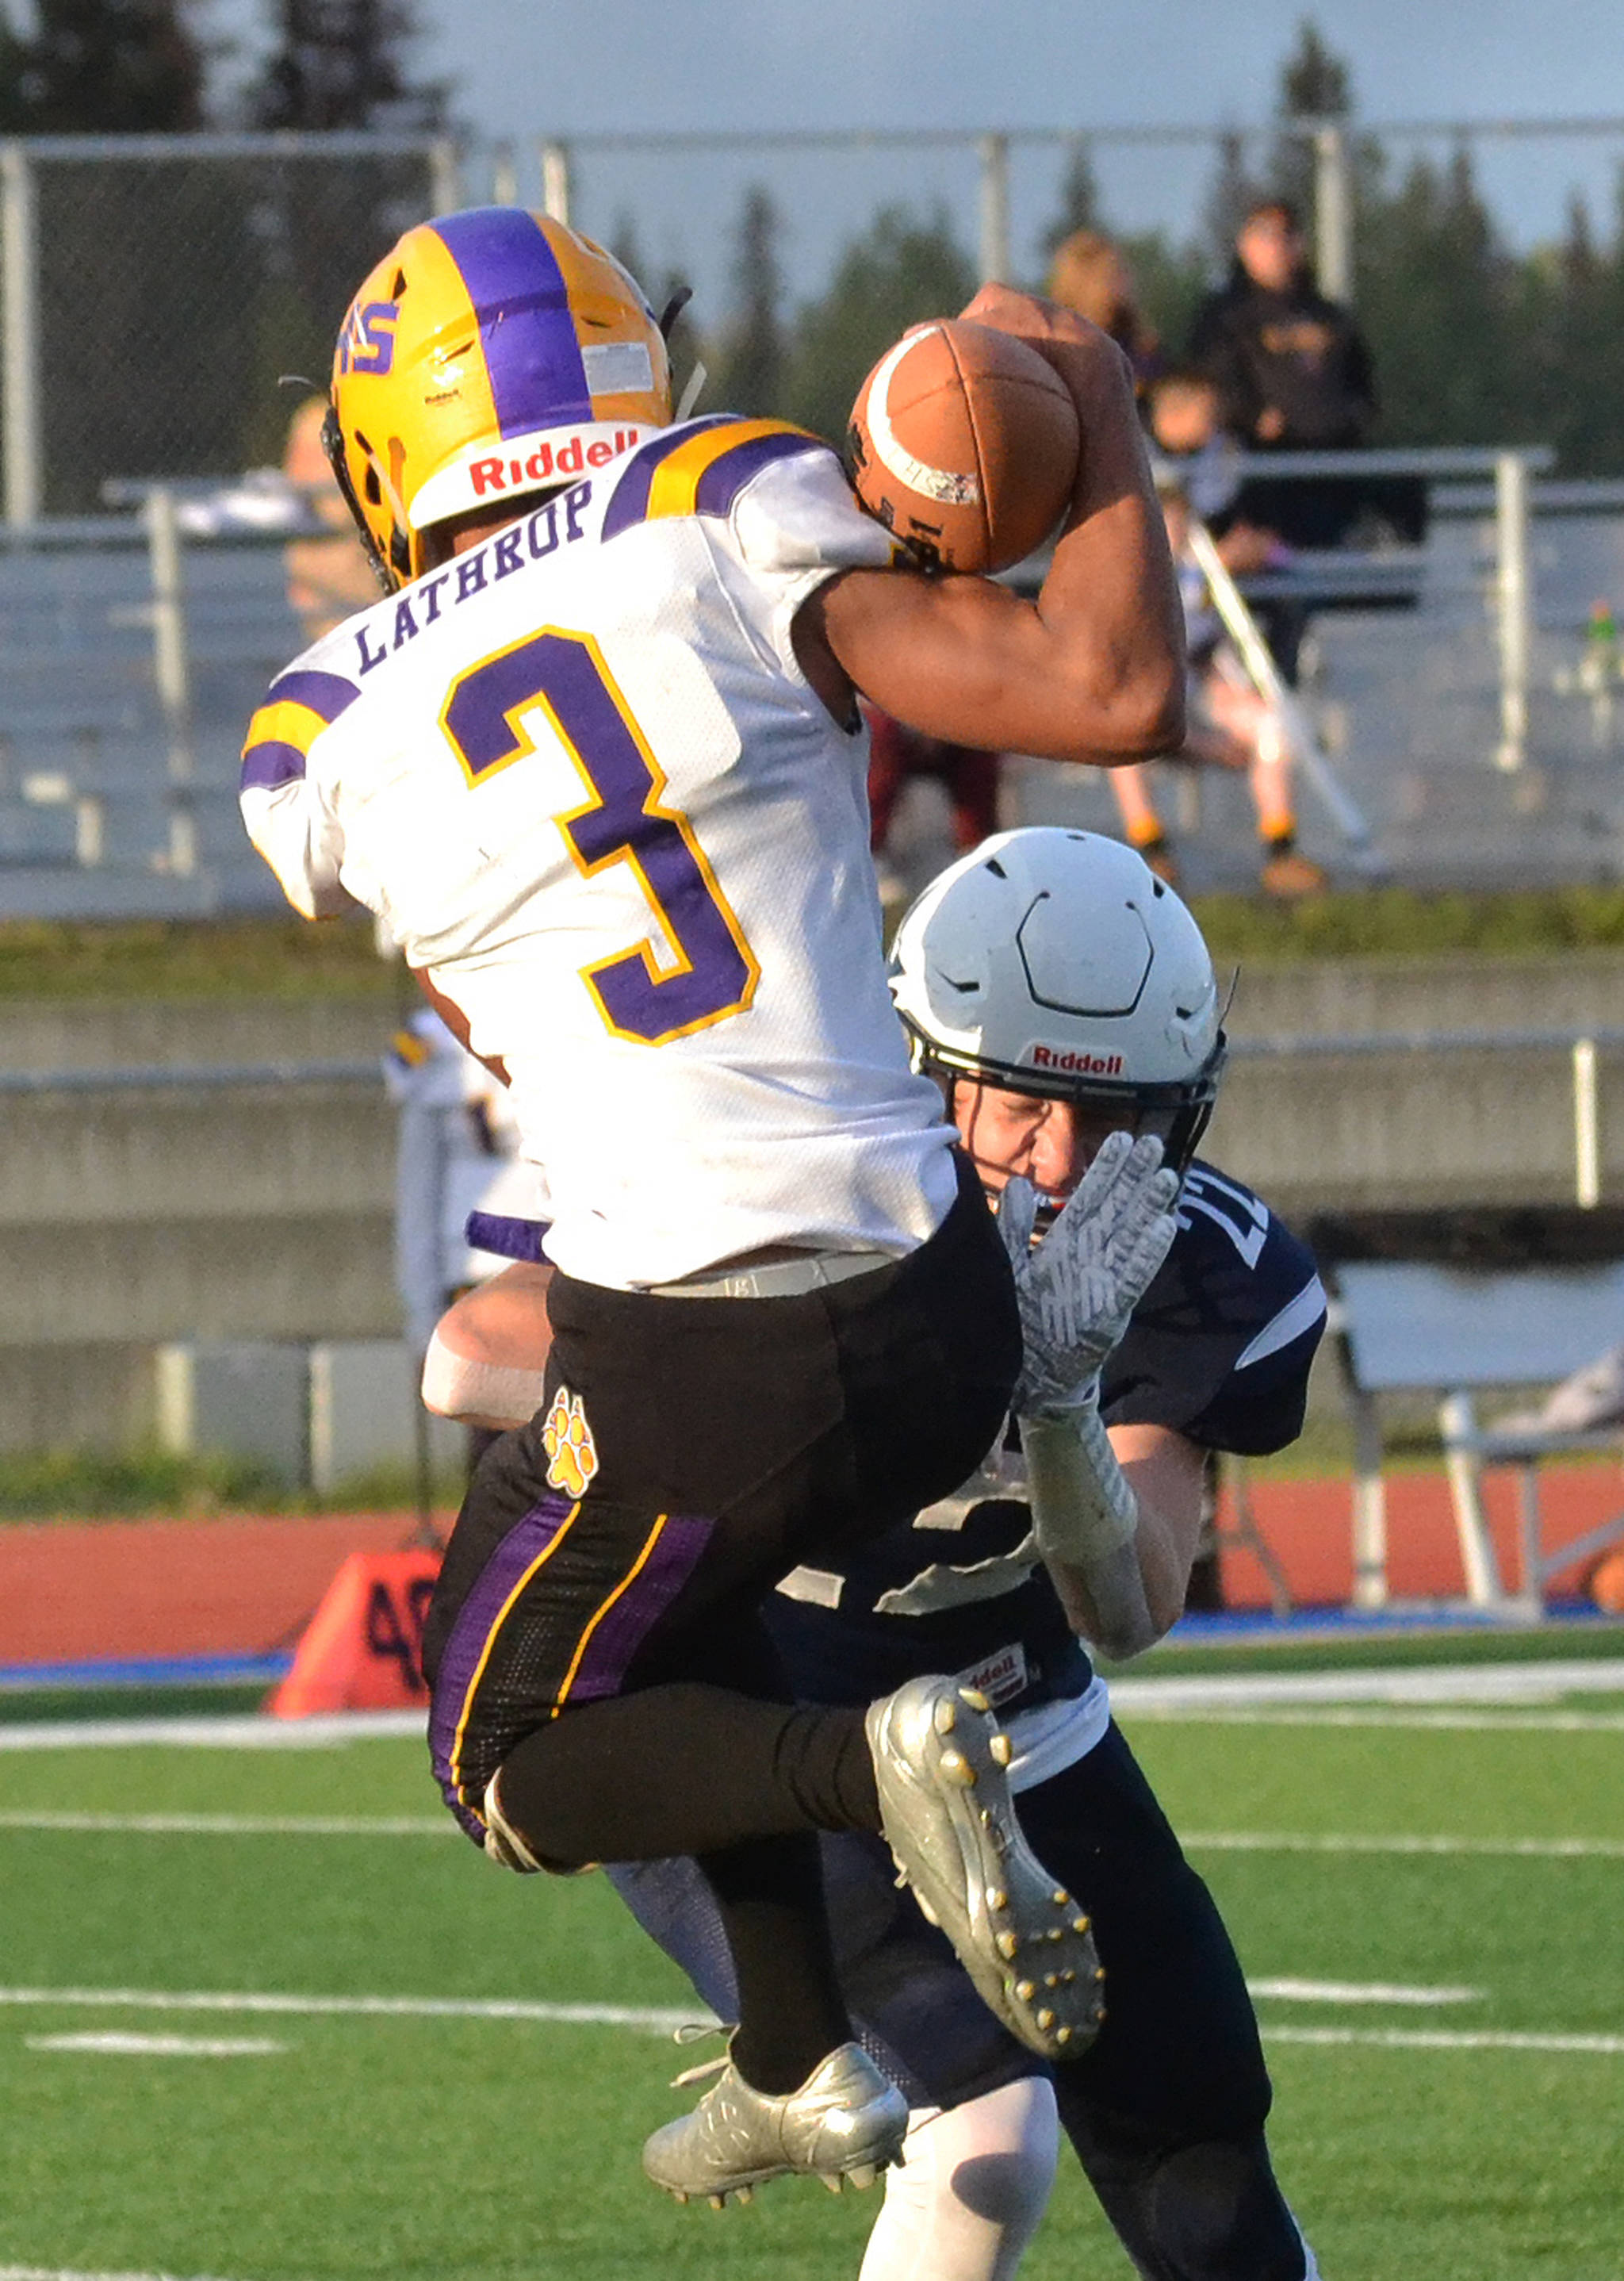 Soldotna’s Ray Chumley tackles Lathrop receiver Jhon Rones (3) Friday, Sept. 13, 2019, at Justin Maile Field in Soldotna, Alaska. (Photo by Joey Klecka/Peninsula Clarion)